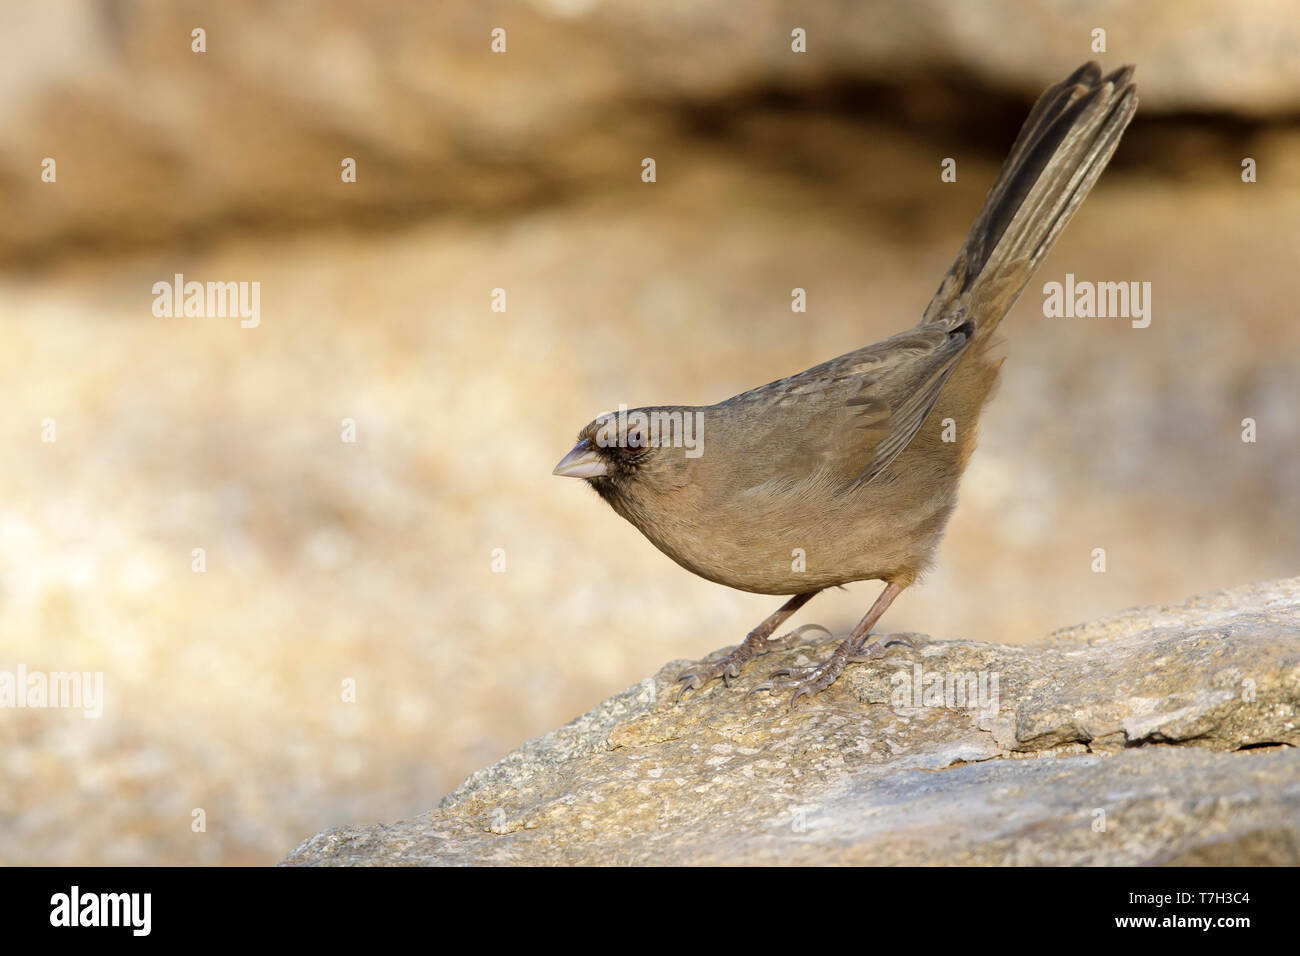 Adult Abert's Towhee (Melozone aberti) perched on a rock in Maricopa Co., Arizona, United States. Stock Photo